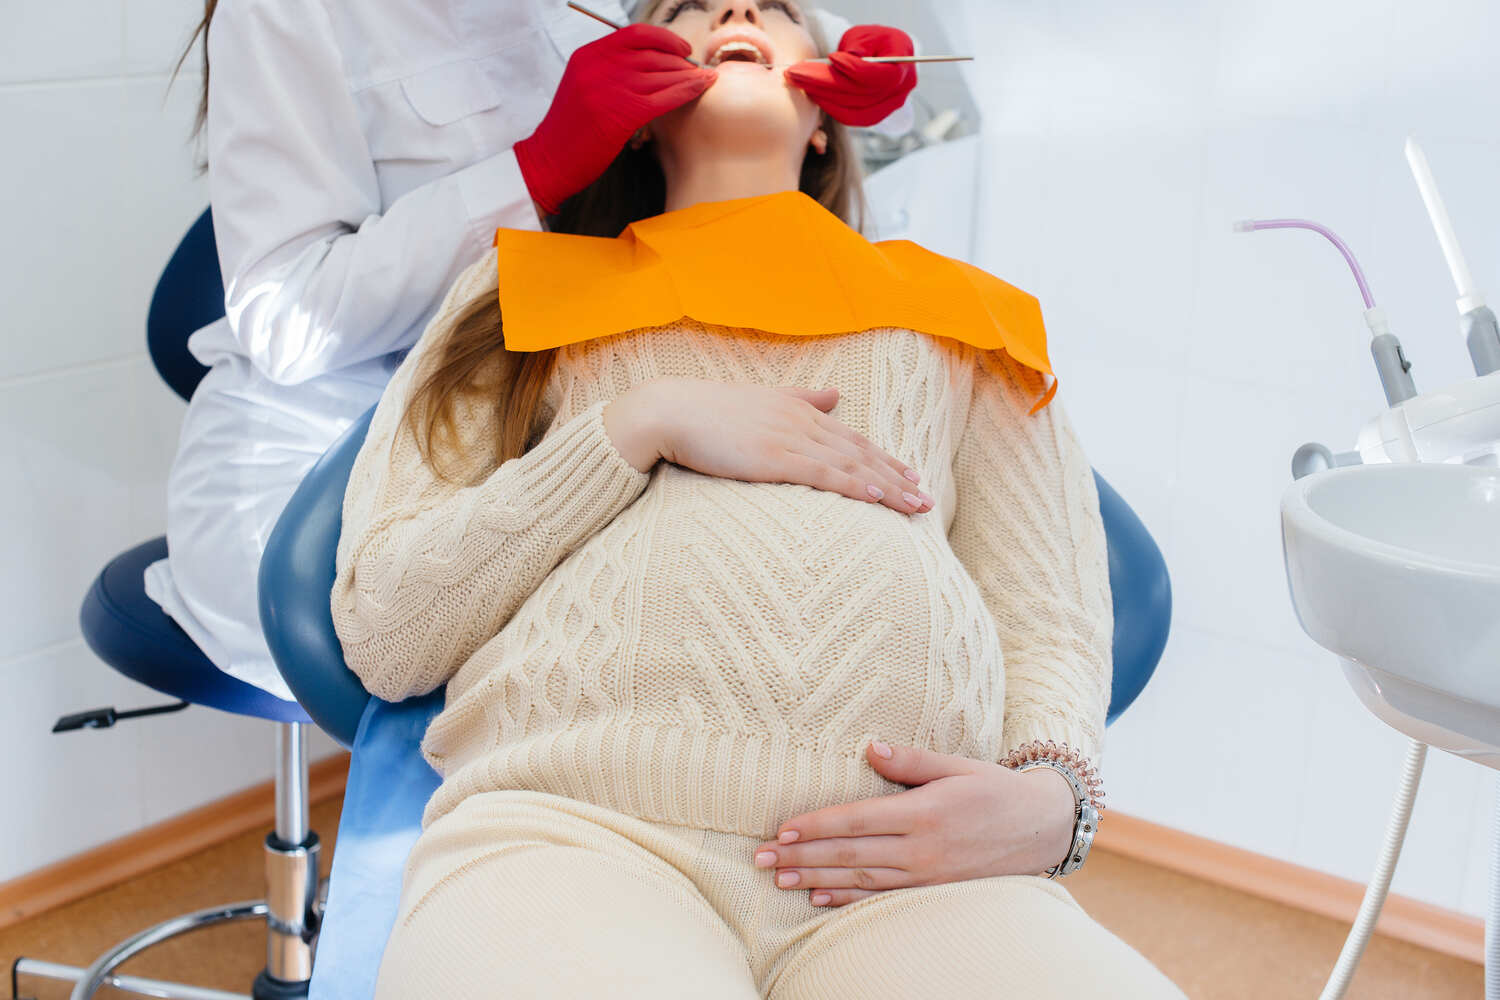 Tooth Extractions During Pregnancy- Is It Safe